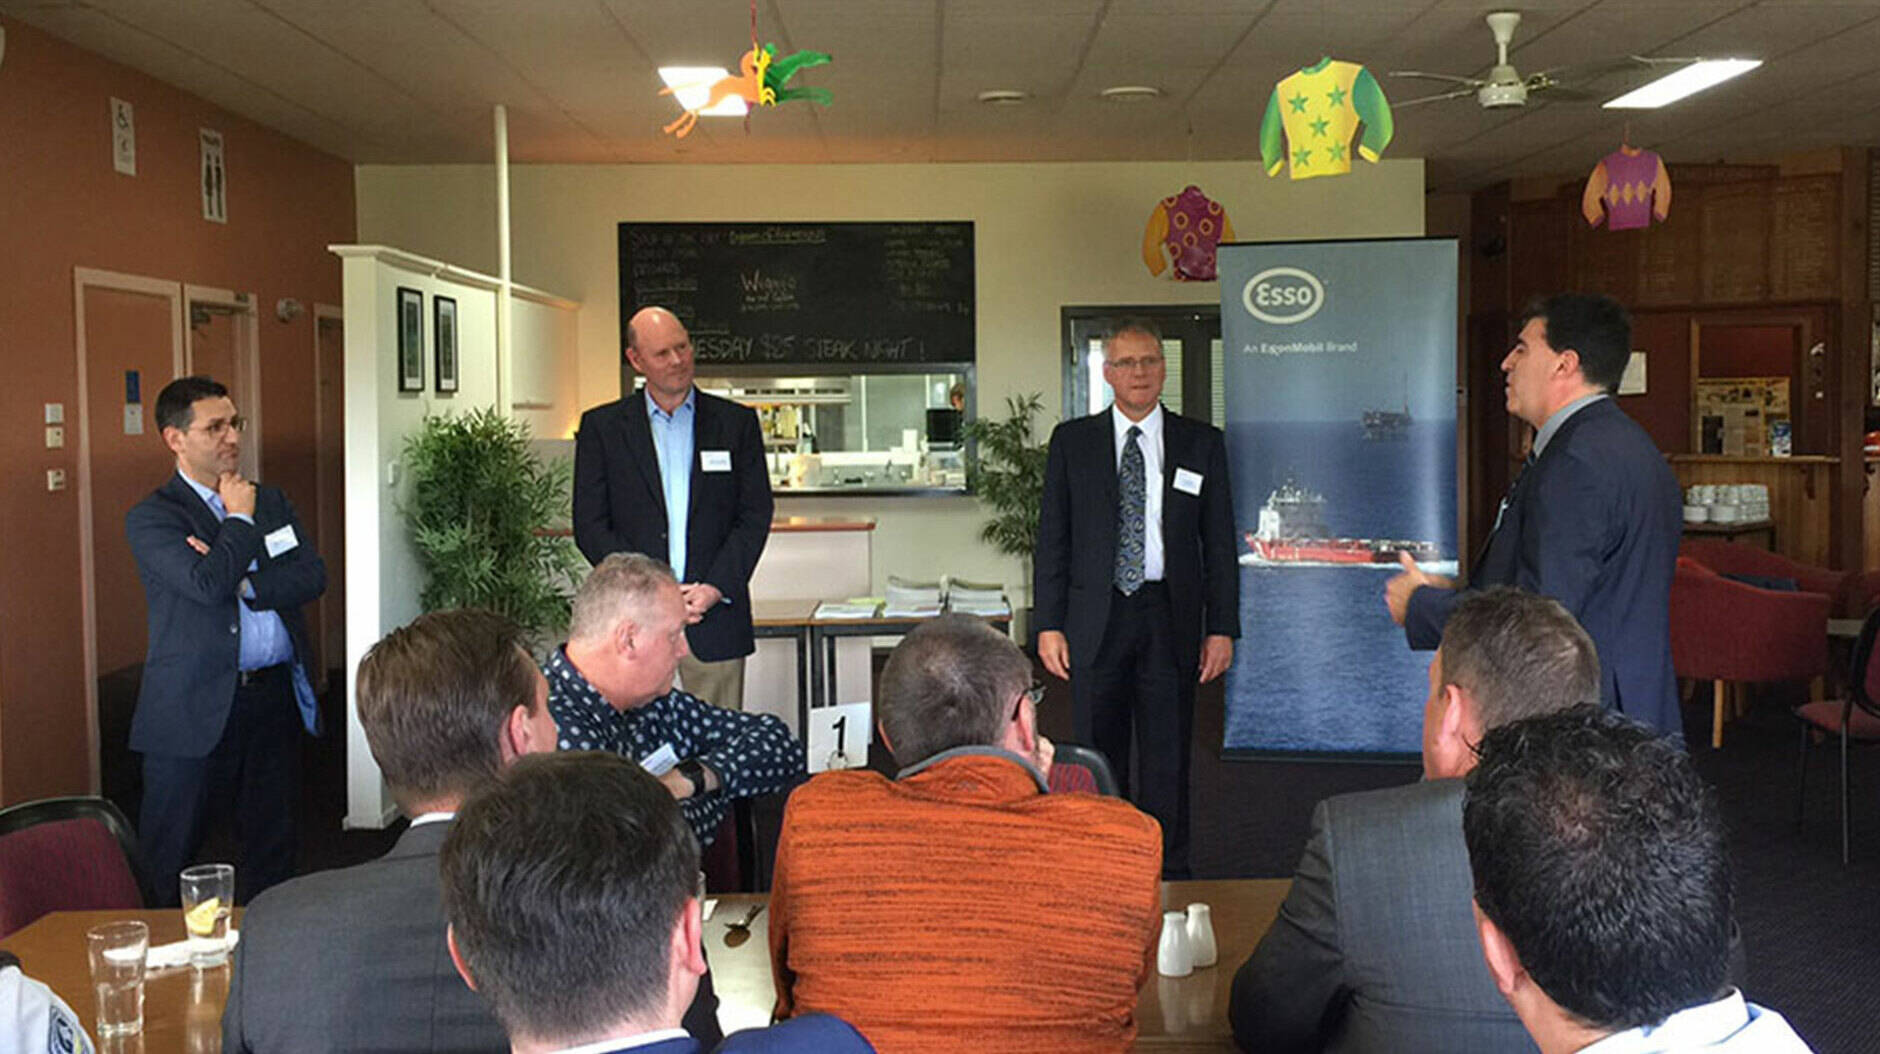 Image Photo— Michael Sousa, Ports Director, Qube (pictured left), Mark Duthie, Barry Beach Marine Terminal Superintendent, Esso Australia (pictured centre) and Geoff Humphreys, Offshore Operations Manager, Esso Australia (pictured right) answer questions at the 2017 Barry Beach Marine Terminal Community Lunch at Foster.